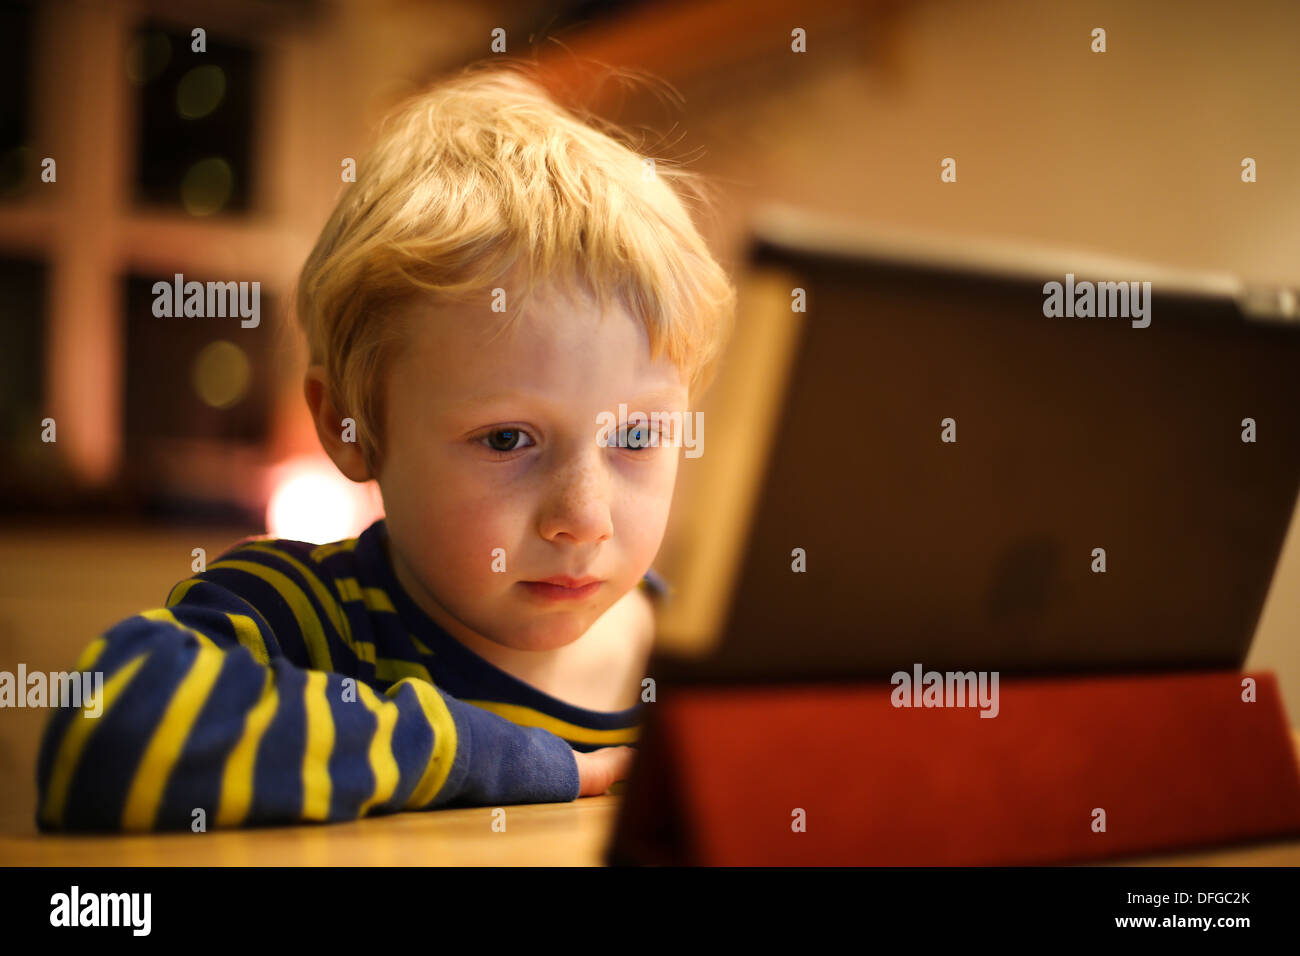 Child captivated by an iPad Stock Photo